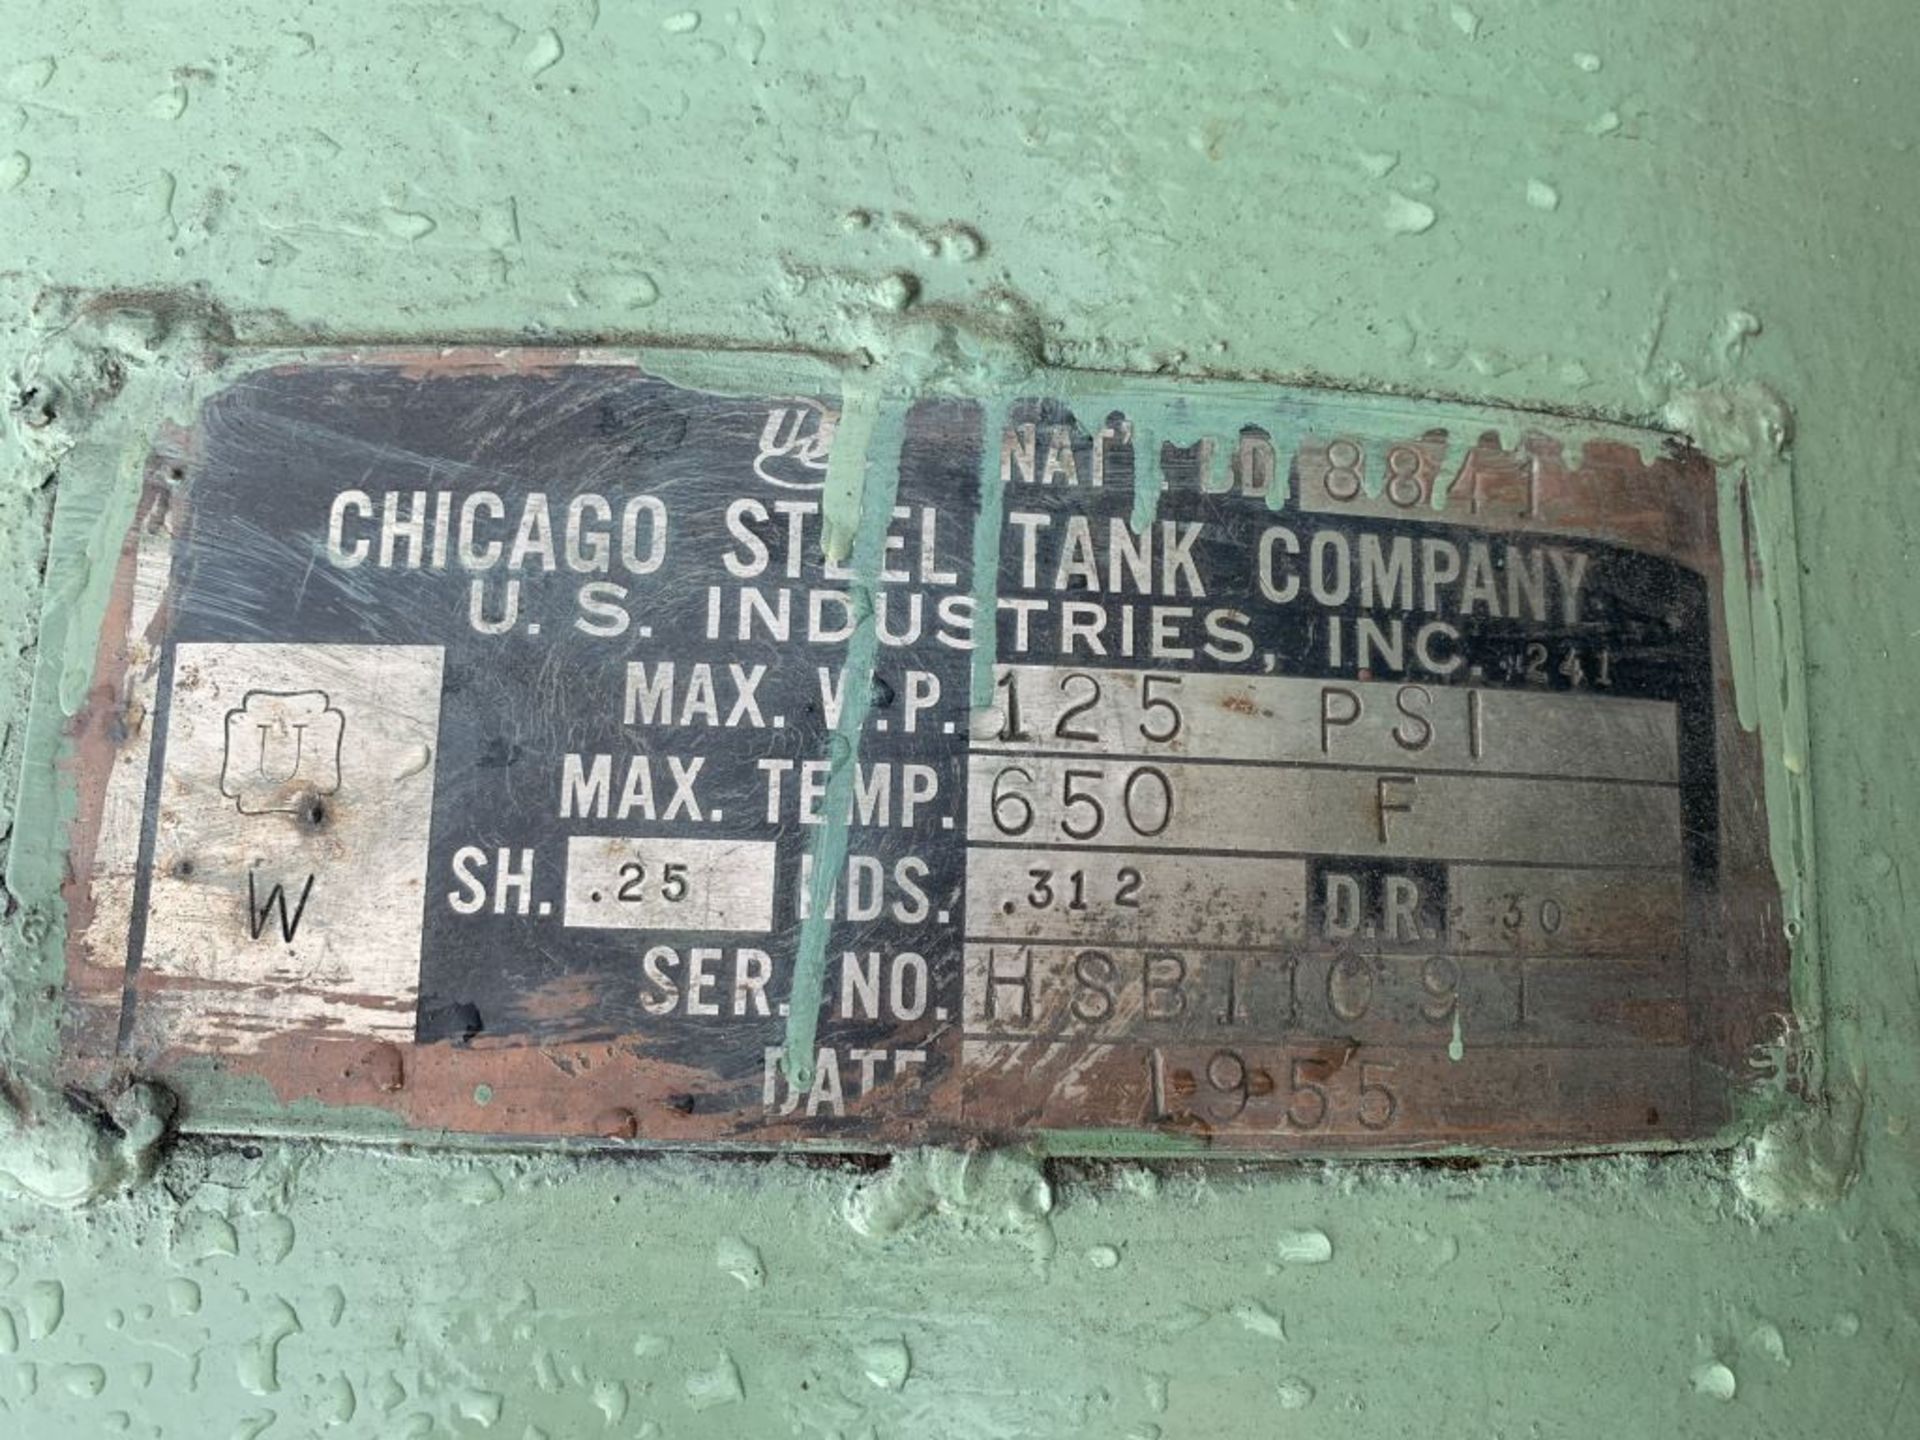 CHICAGO STEEL AIR TANK - $20.00 Rigging Fee Due to Onsite Rigger - Located in Holland, Ohio - Image 3 of 3